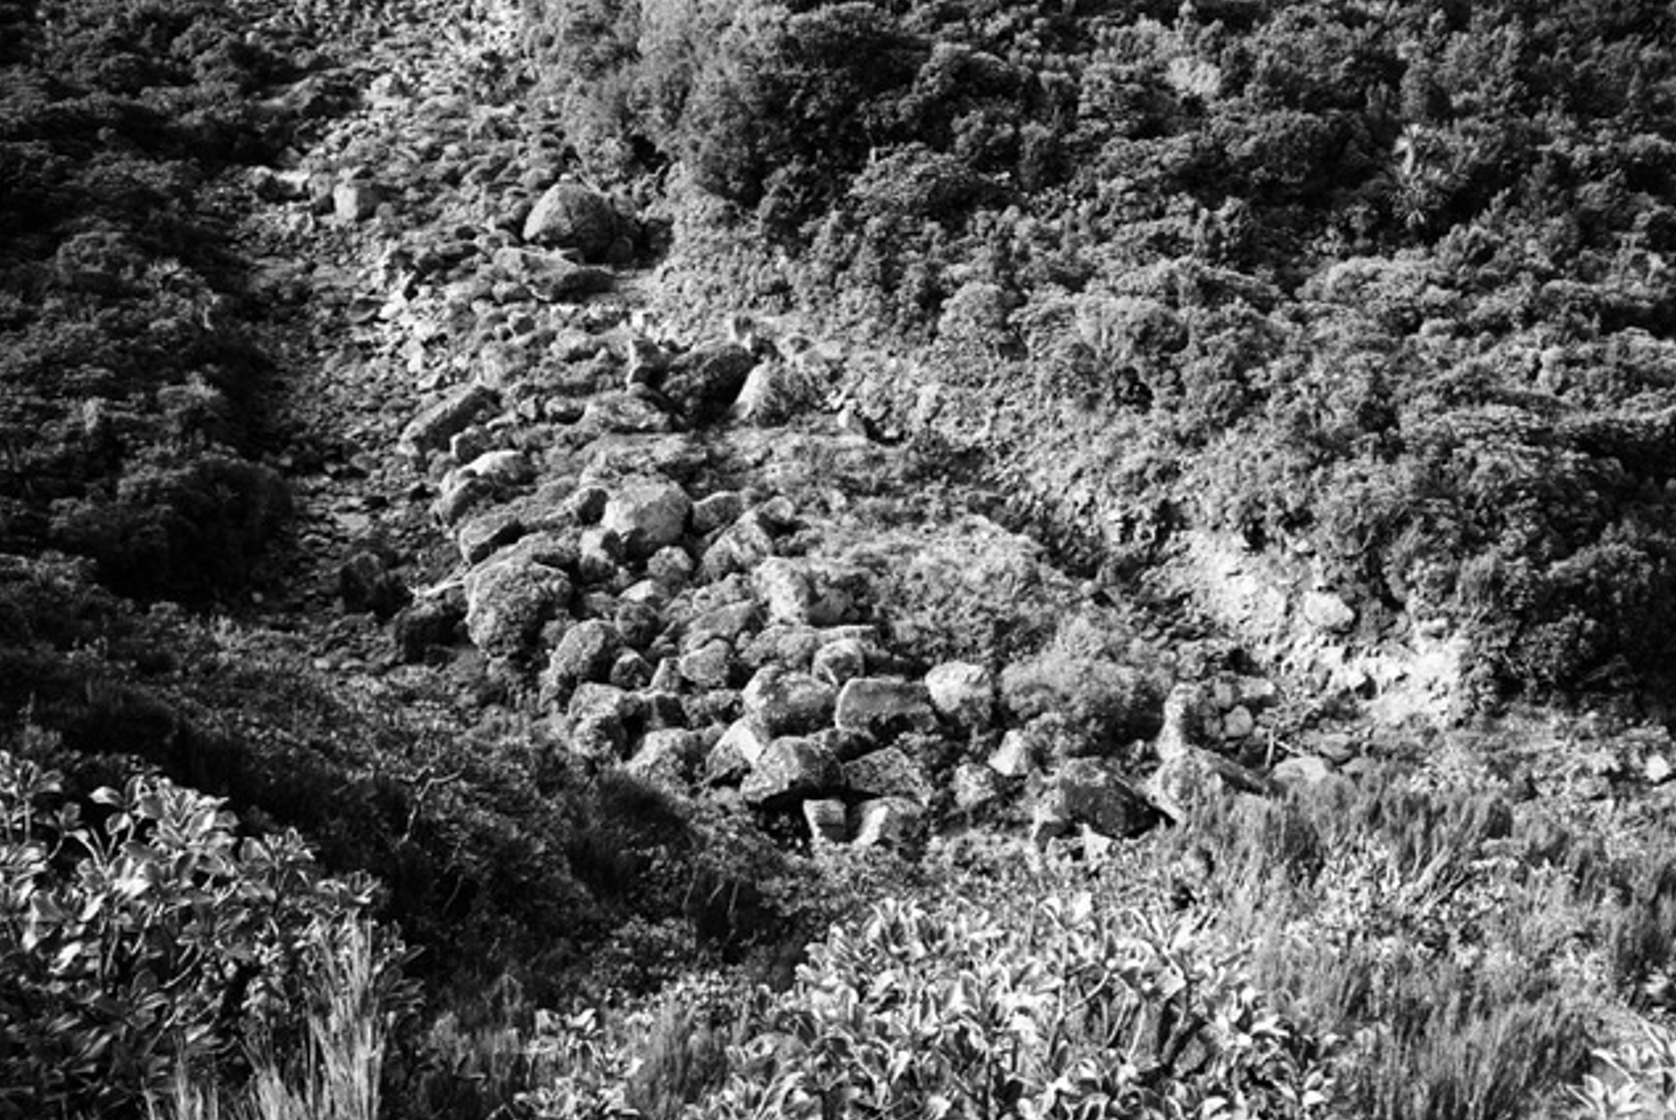 black and white photo of plant life and loose large rock